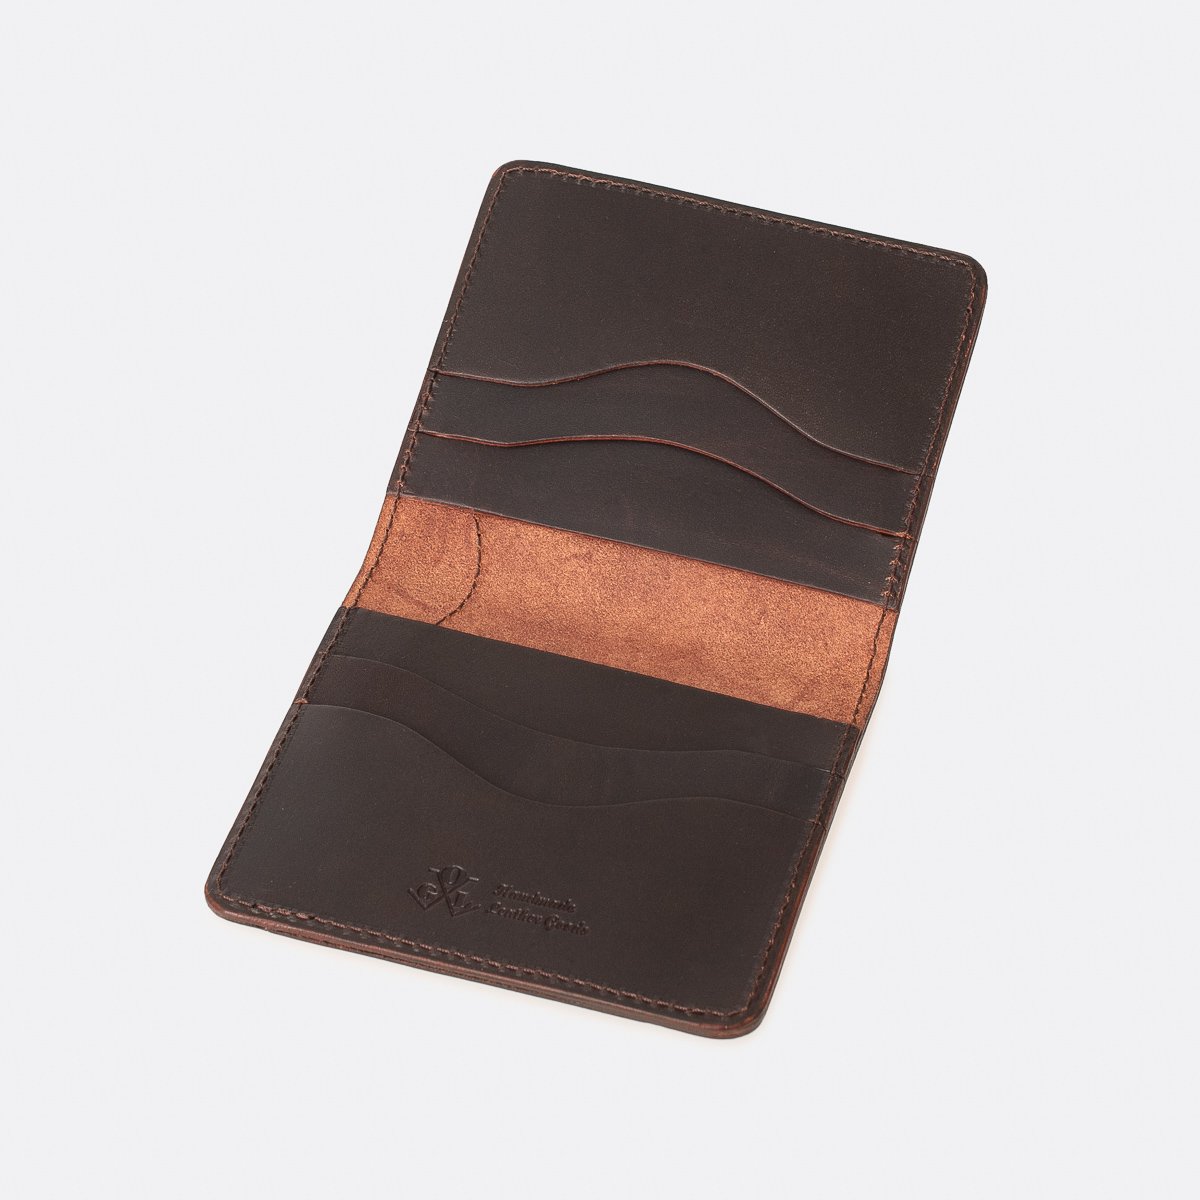 Obbi Good Label Condor Bifold Wallet with Outer Bill Slot - Brown